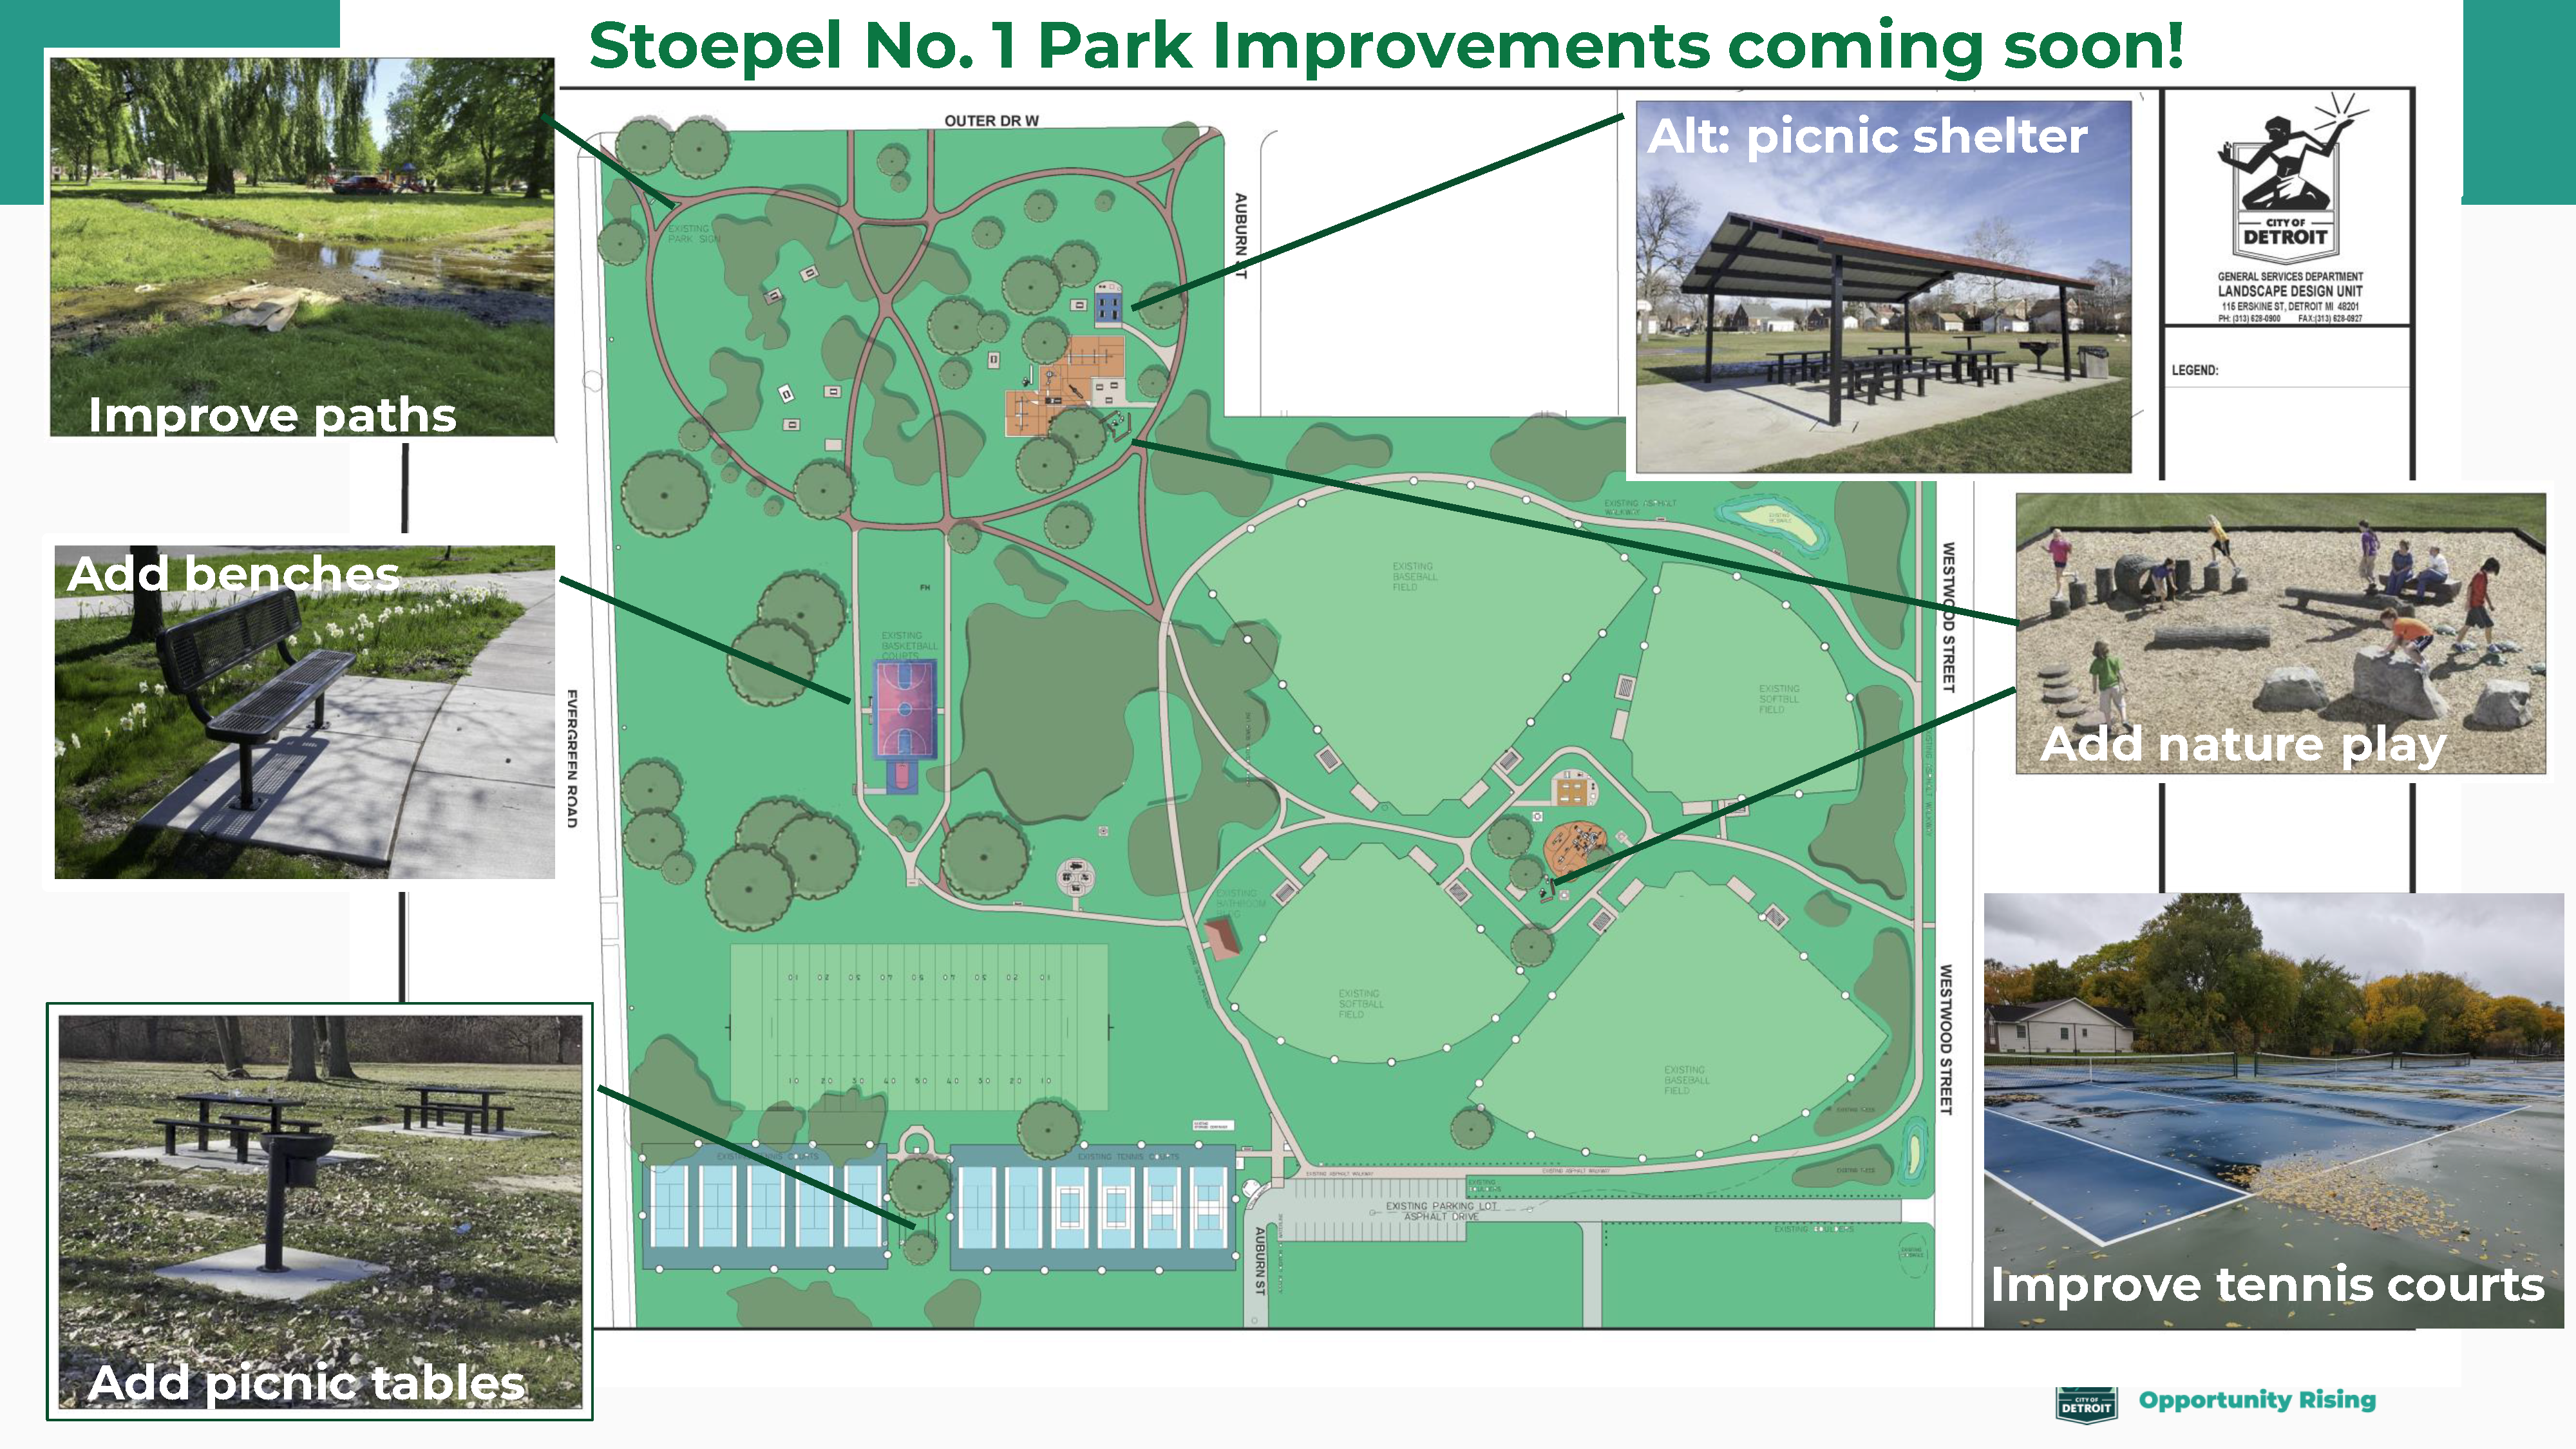 Stoepel No.1 Park Final Design: Improve paths, Add benches, Add picnic tables, Alt: picnic shelter, Add nature play, Improve tennis courts